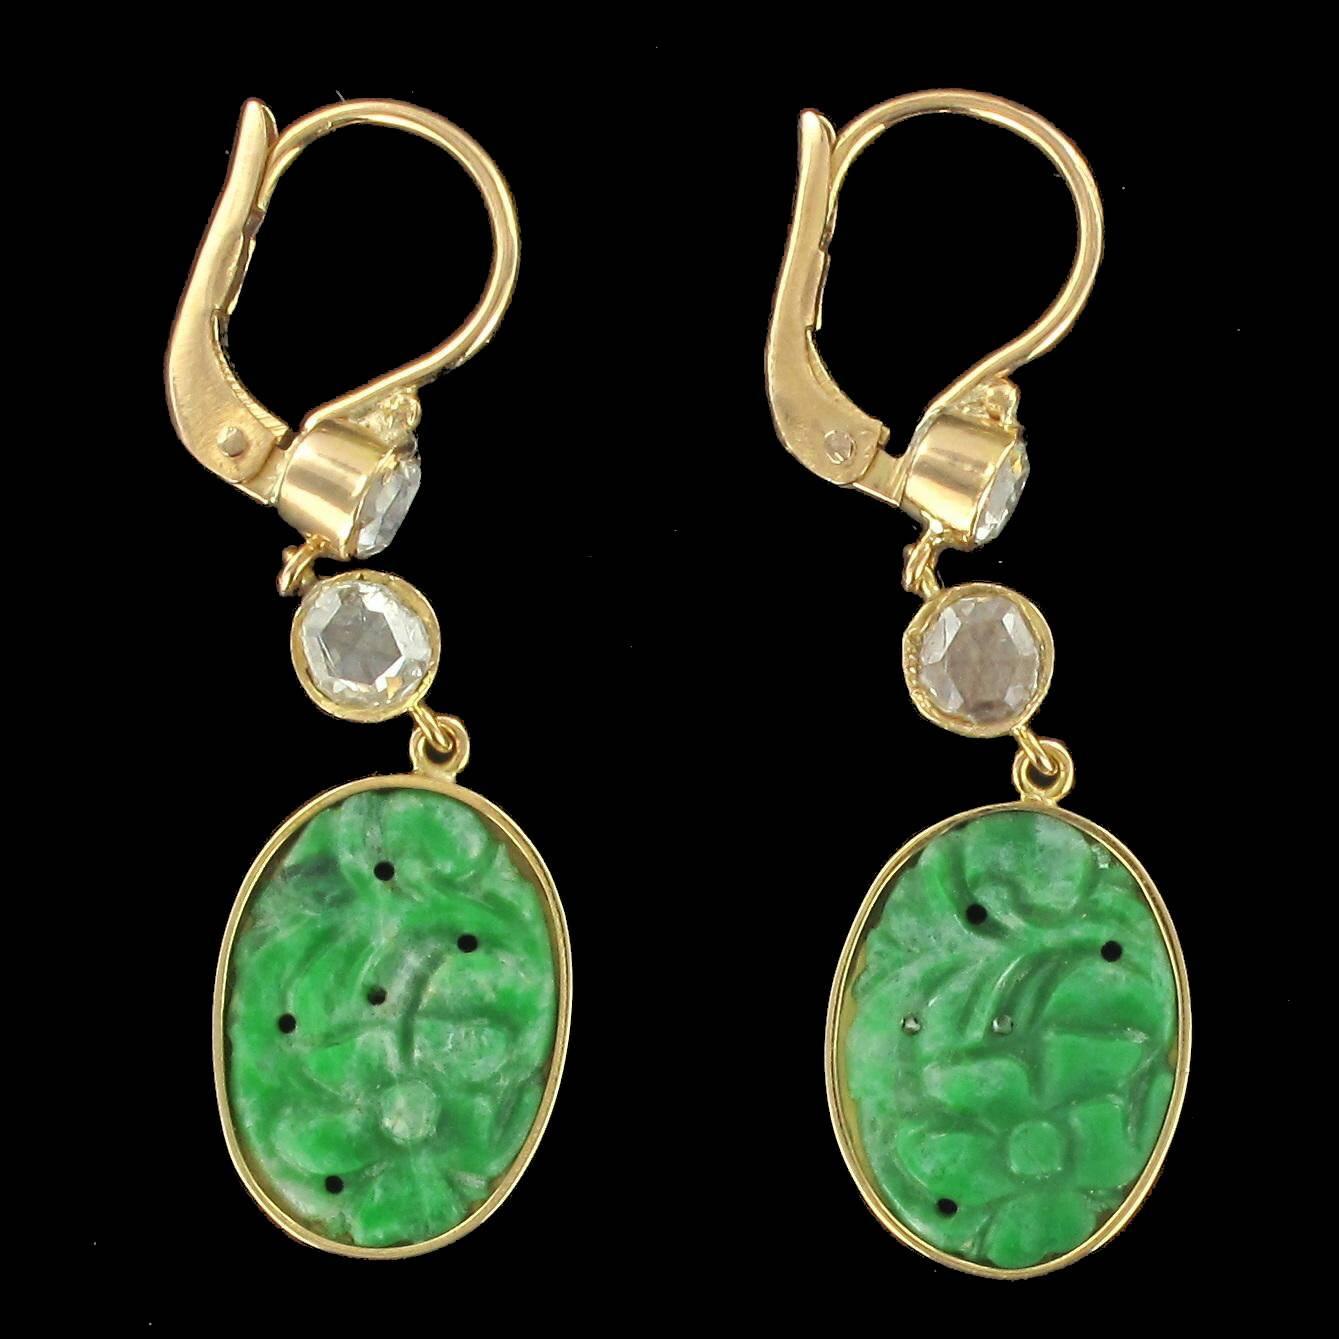 For pierced ears.
Pair of dangle earrings in yellow gold, 18 carats.

Each earring is set with a rose cut bezel set diamond from which is suspended another rose cut bezel set diamond and an oval flower engraved jade plaque encircled with gold.